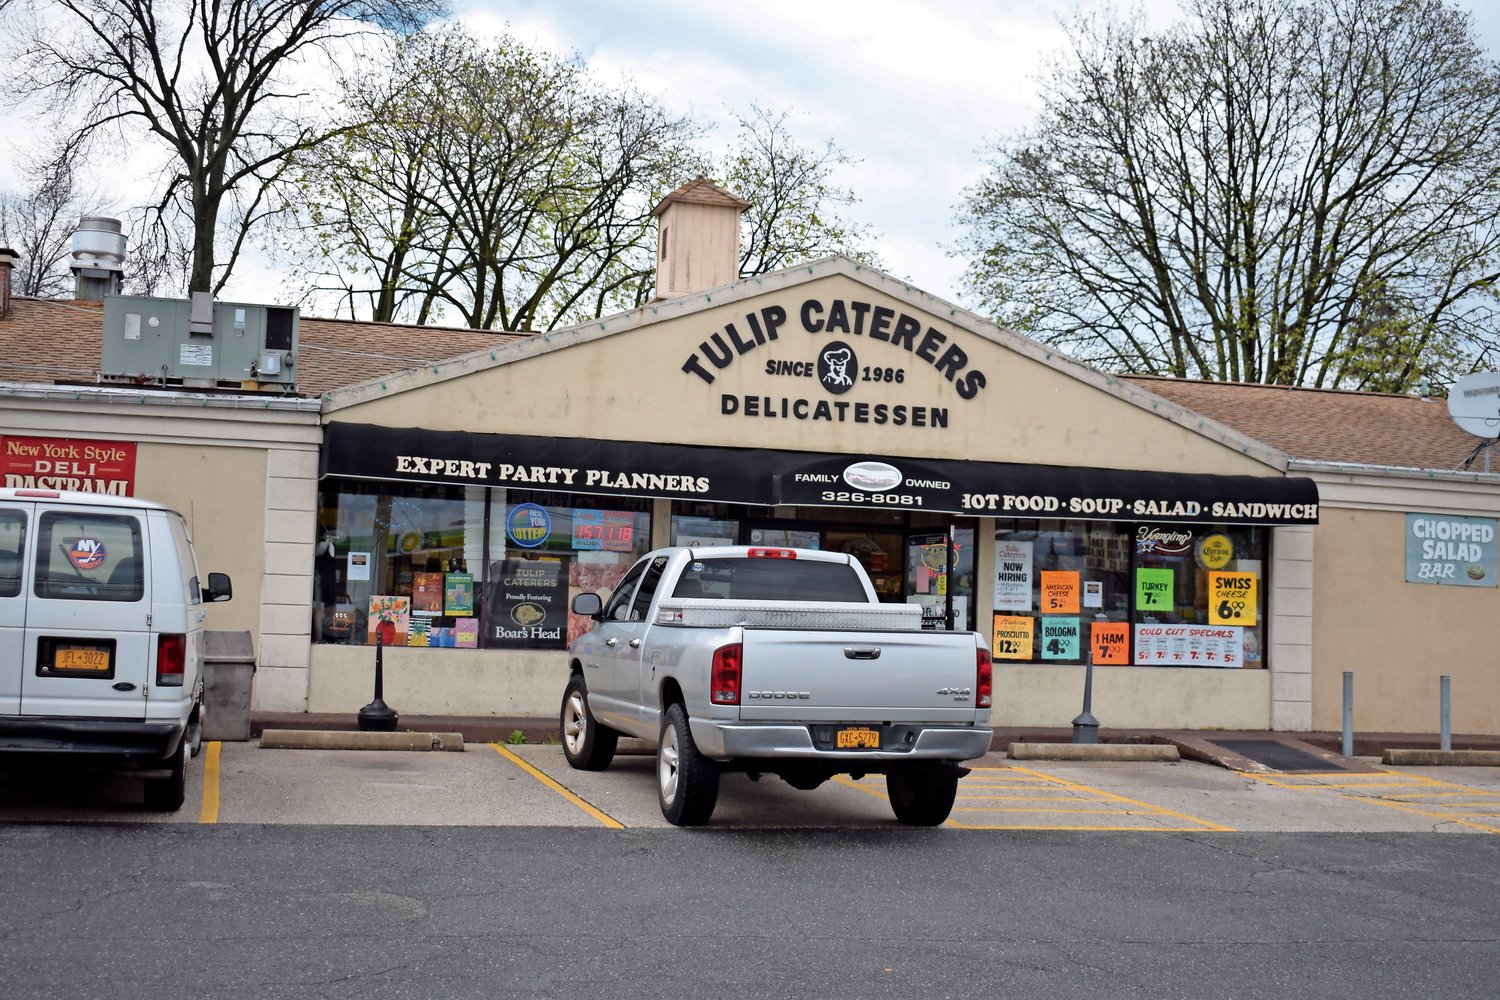 Tulip Caterers, at the intersection of Tulip Avenue and New Hyde Park Road in Franklin Square, will continue to stay in business, after the town zoning board unanimously voted against the necessary variances to build a 7-Eleven at the site.